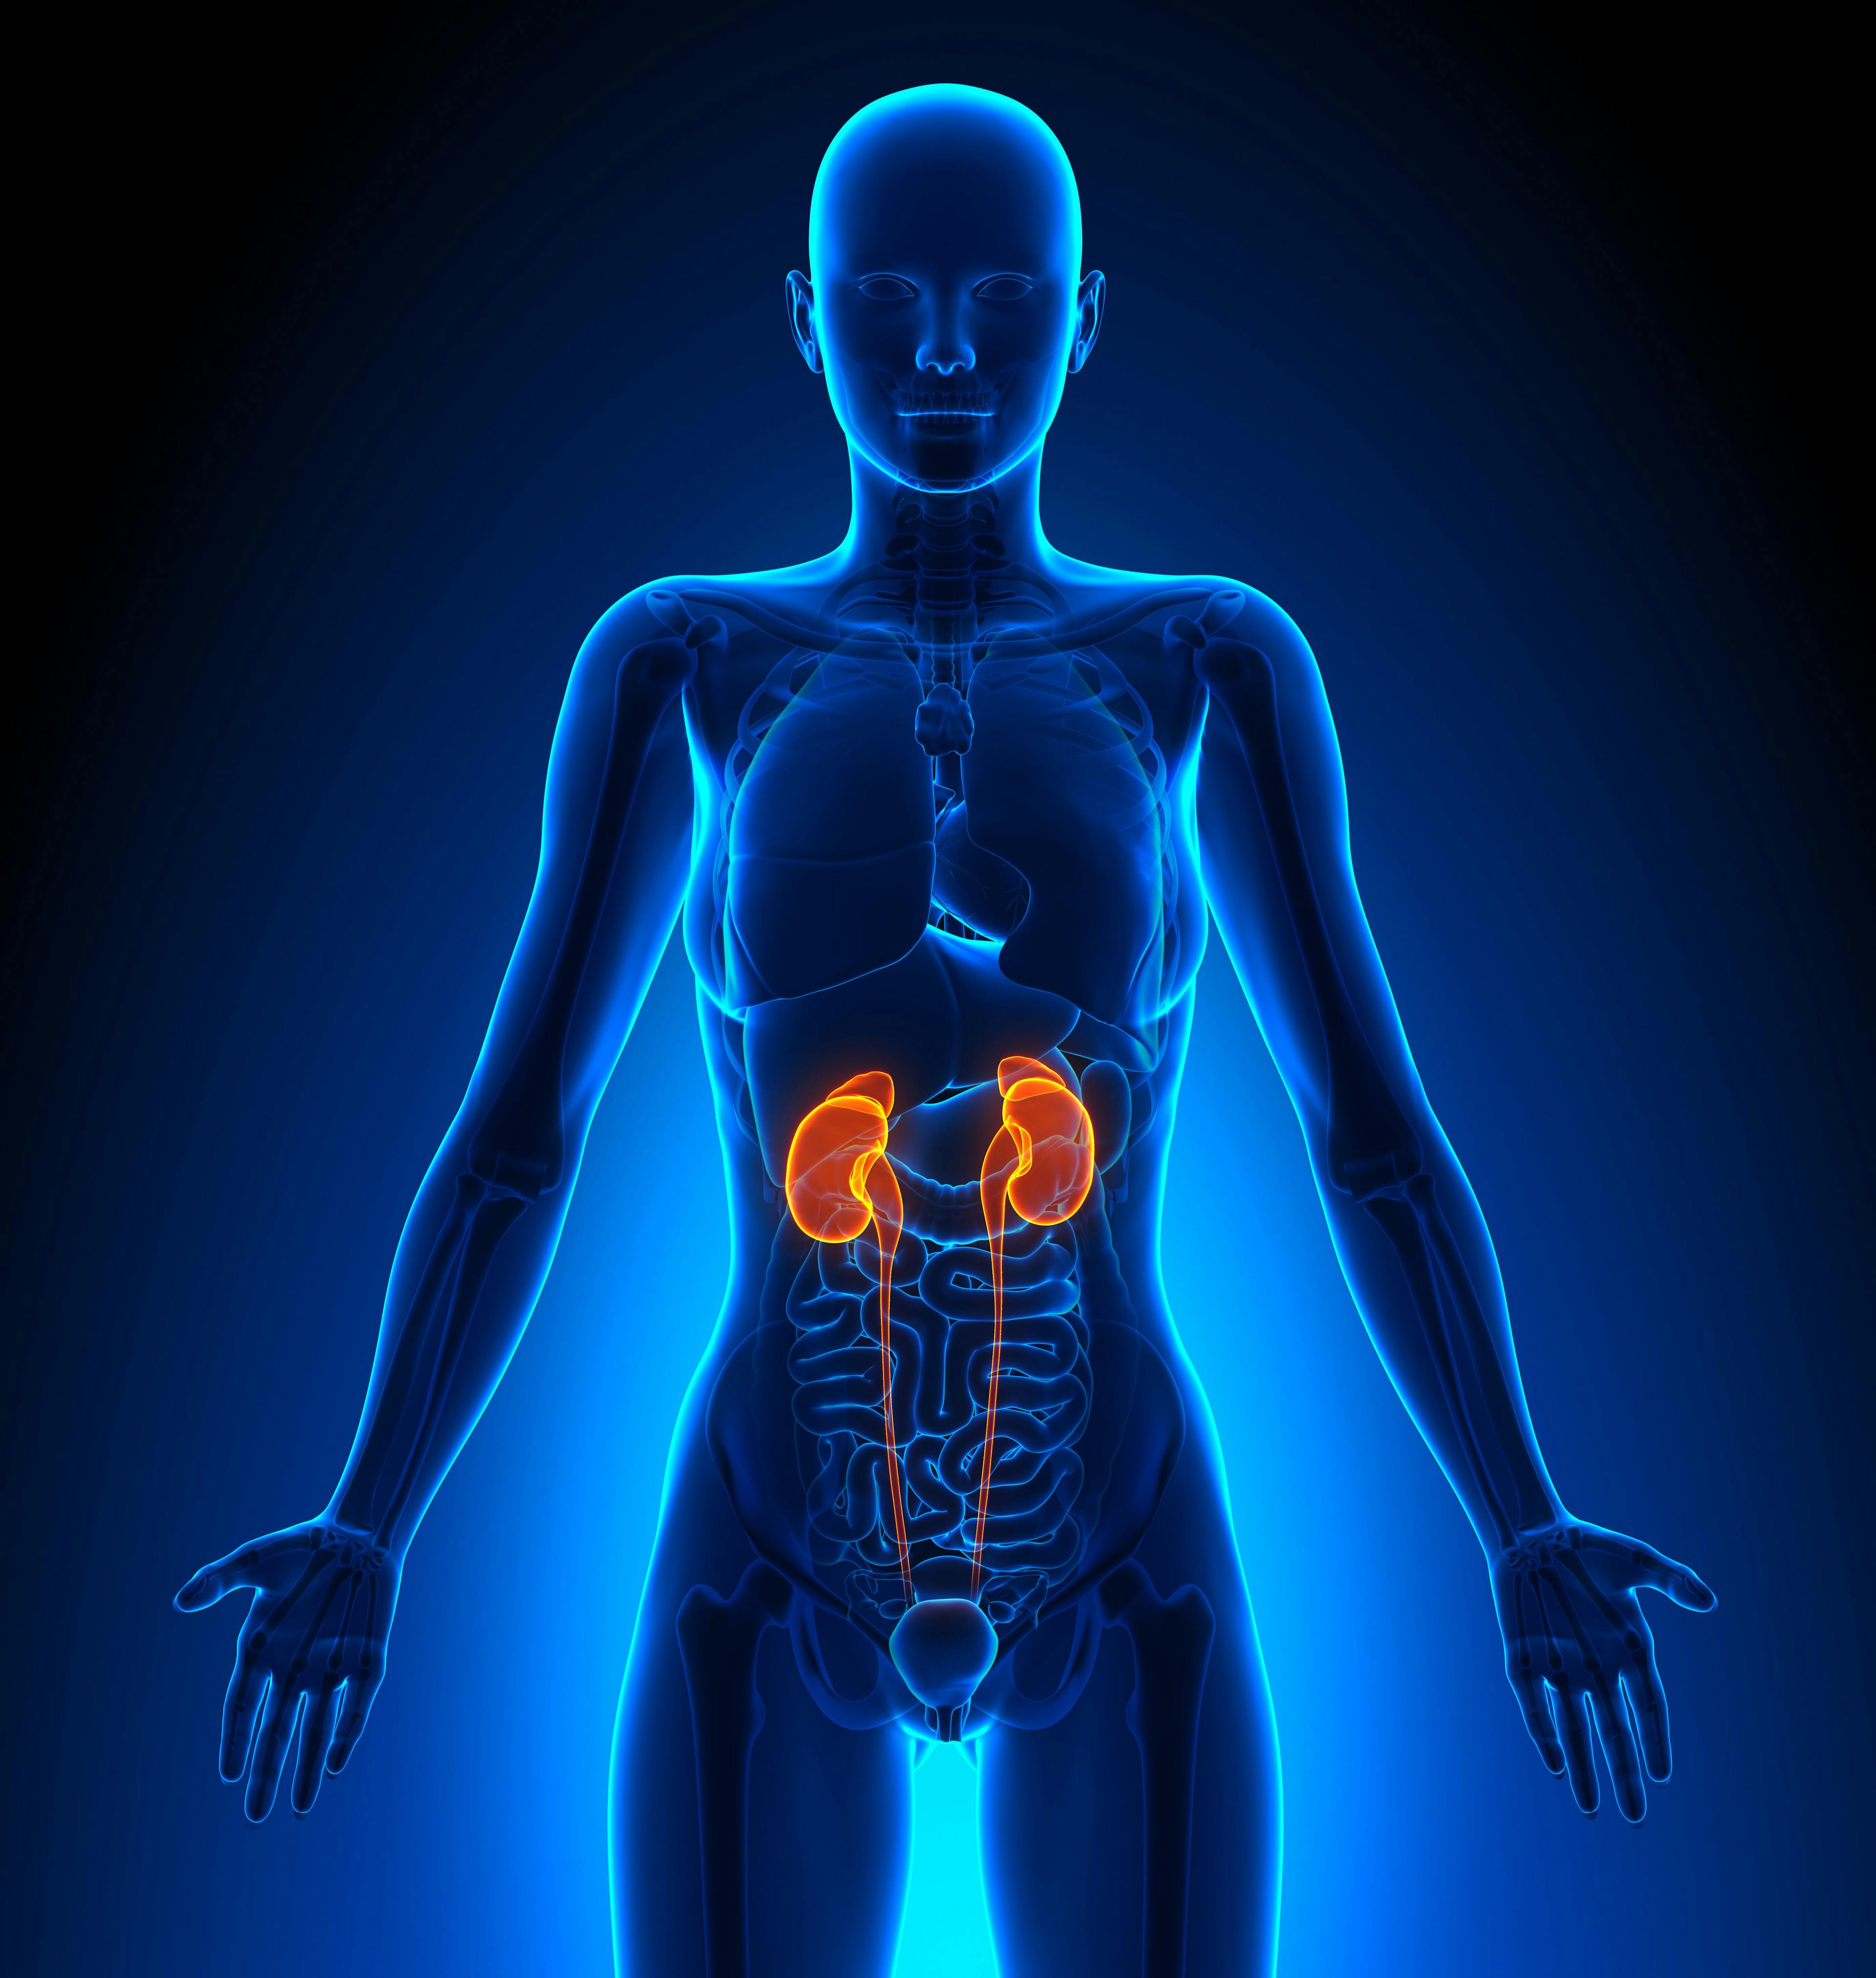 Cabometyx-Opdivo Is ‘One of the New Standards of Care’ in Treating Kidney Cancer Subtype